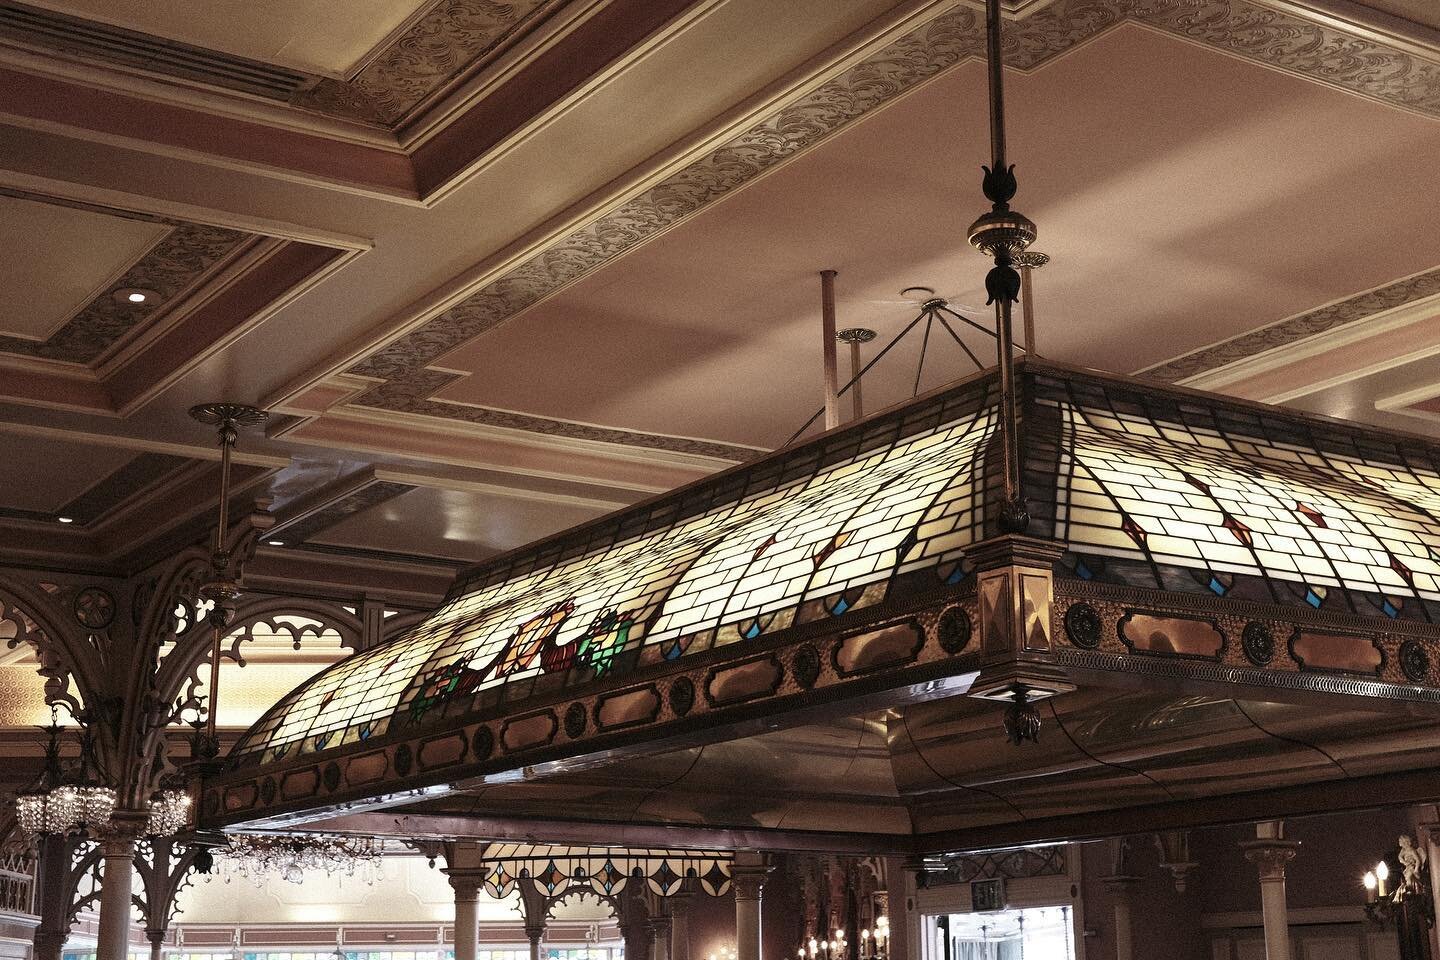 Plaza Inn detail. The main thing in this photo is a functional thing that keeps food warm. It is often said that form follows function, but this is a nonsense statement that was invented by Louis Sullivan and elaborated on by the terrible Adolf Loos.